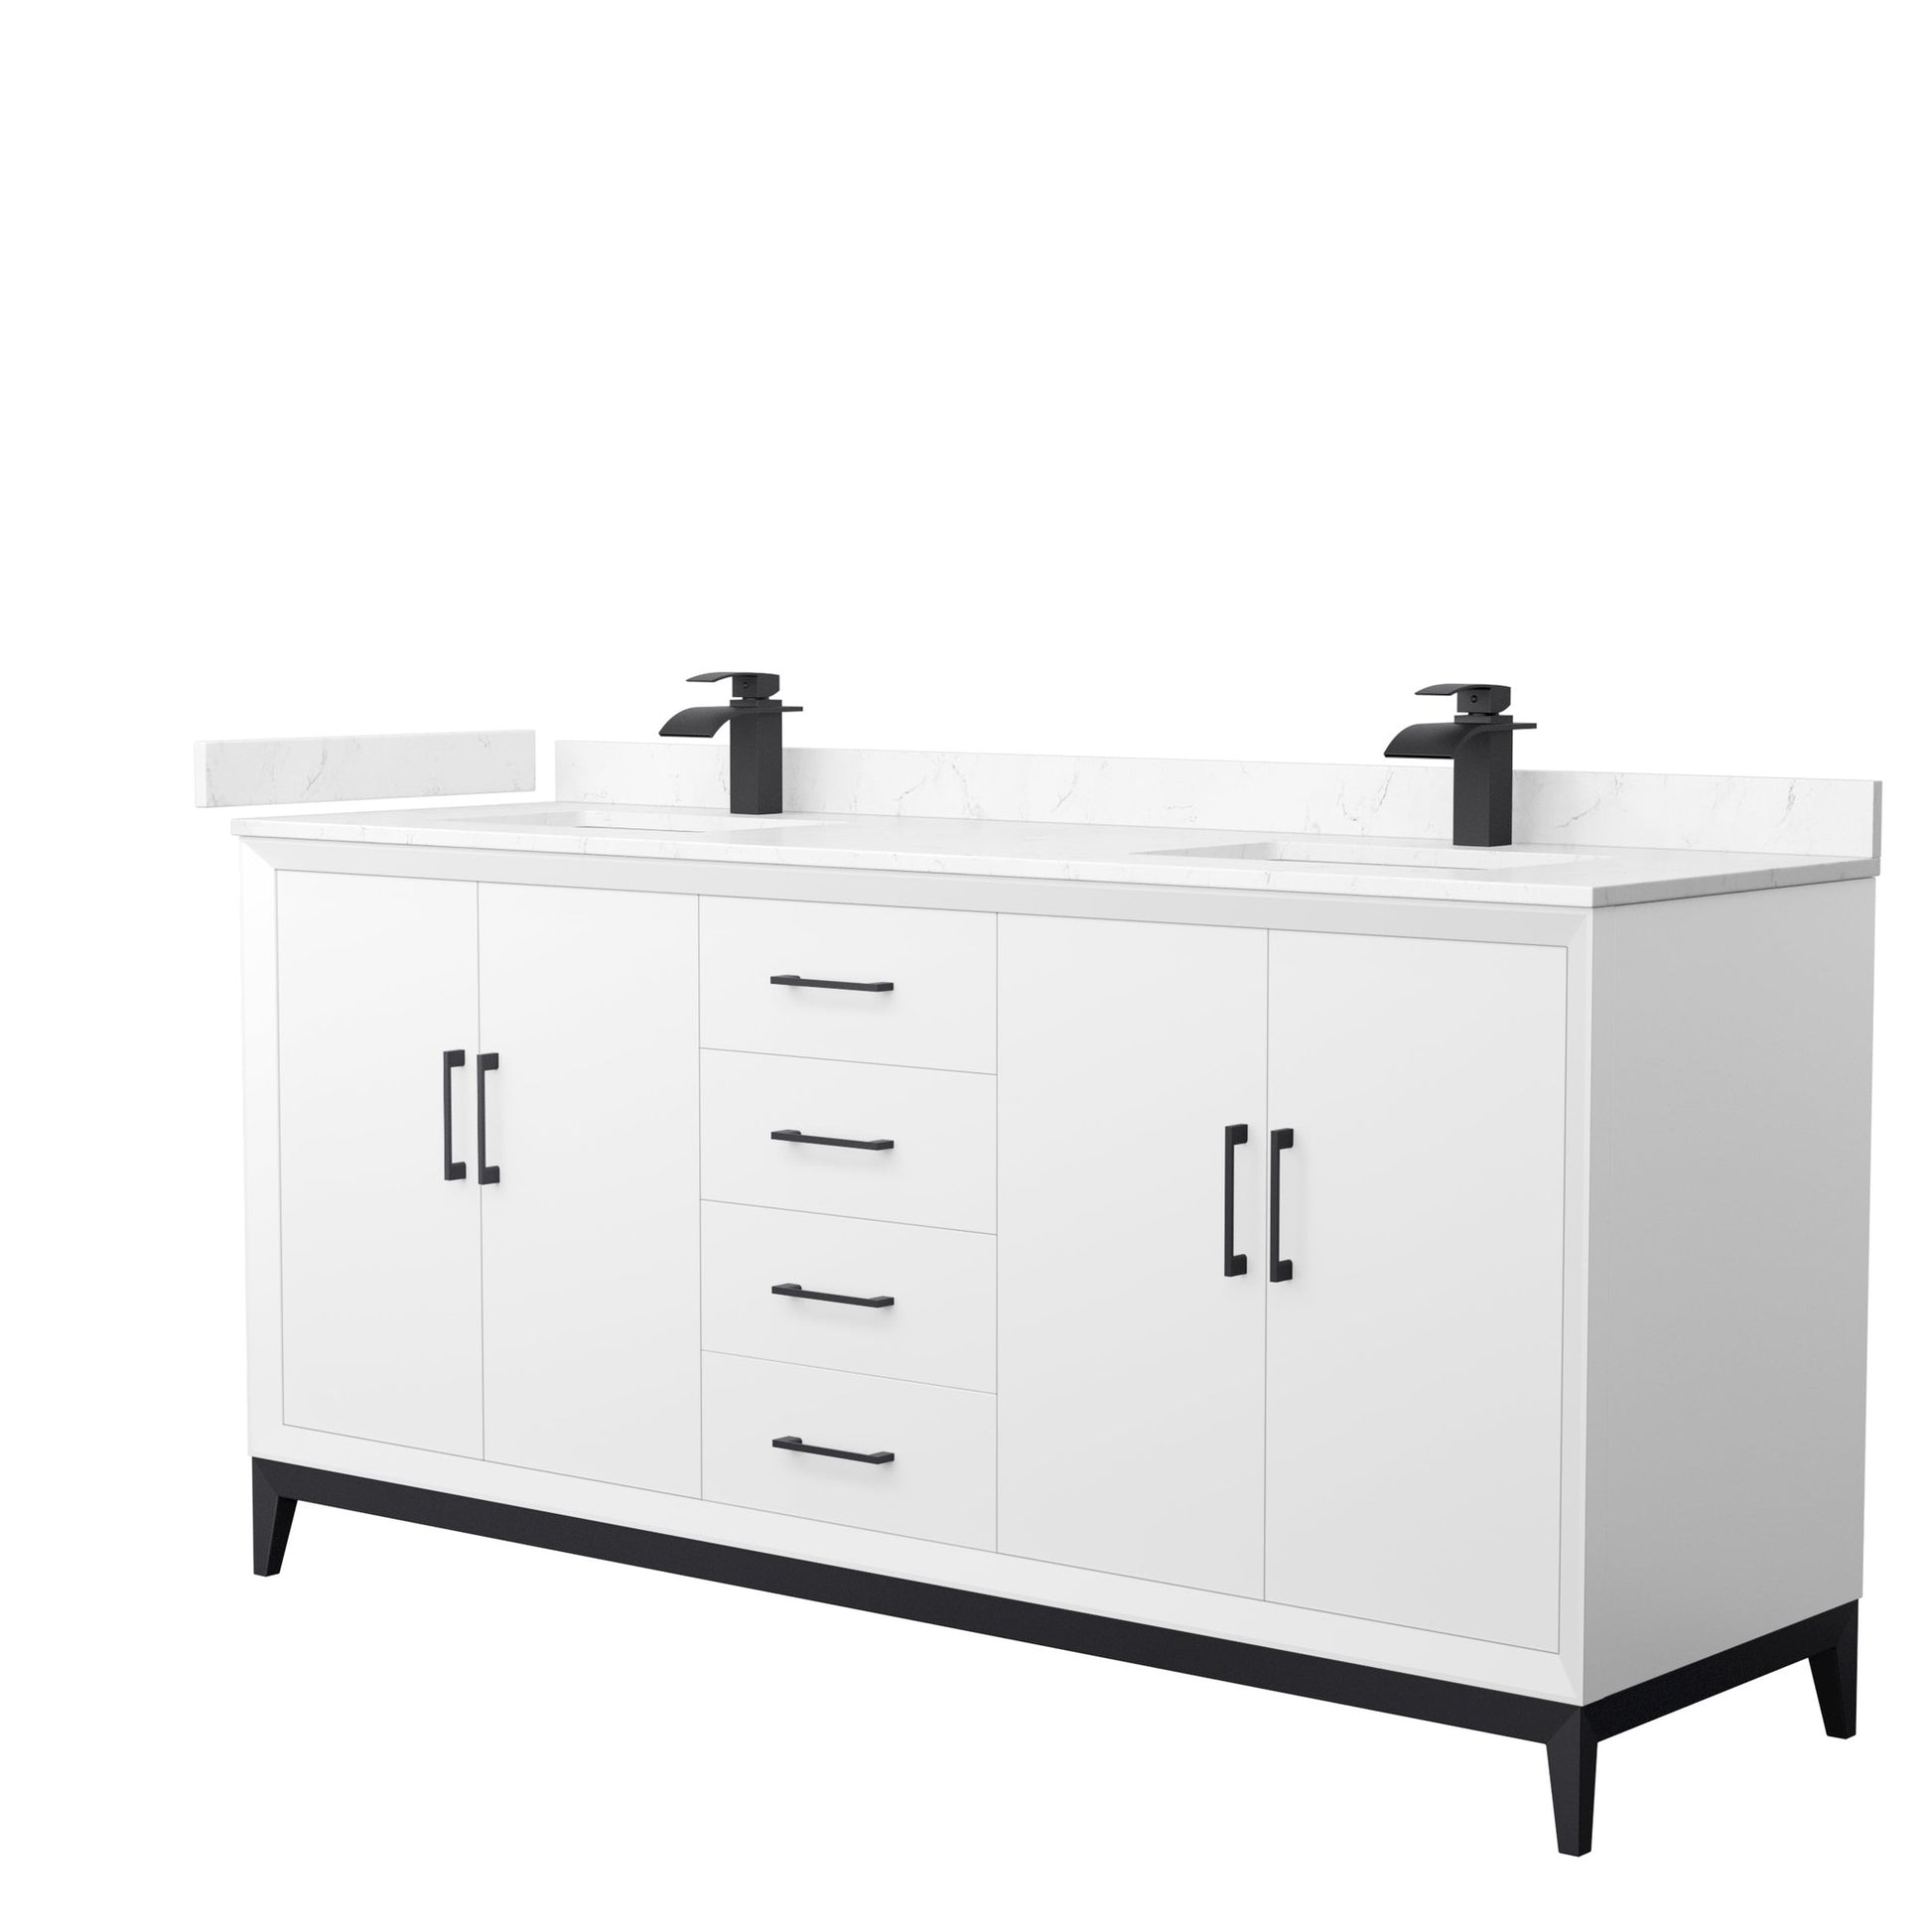 Wyndham Collection Amici 72" Double Bathroom Vanity in White, Carrara Cultured Marble Countertop, Undermount Square Sinks, Matte Black Trim